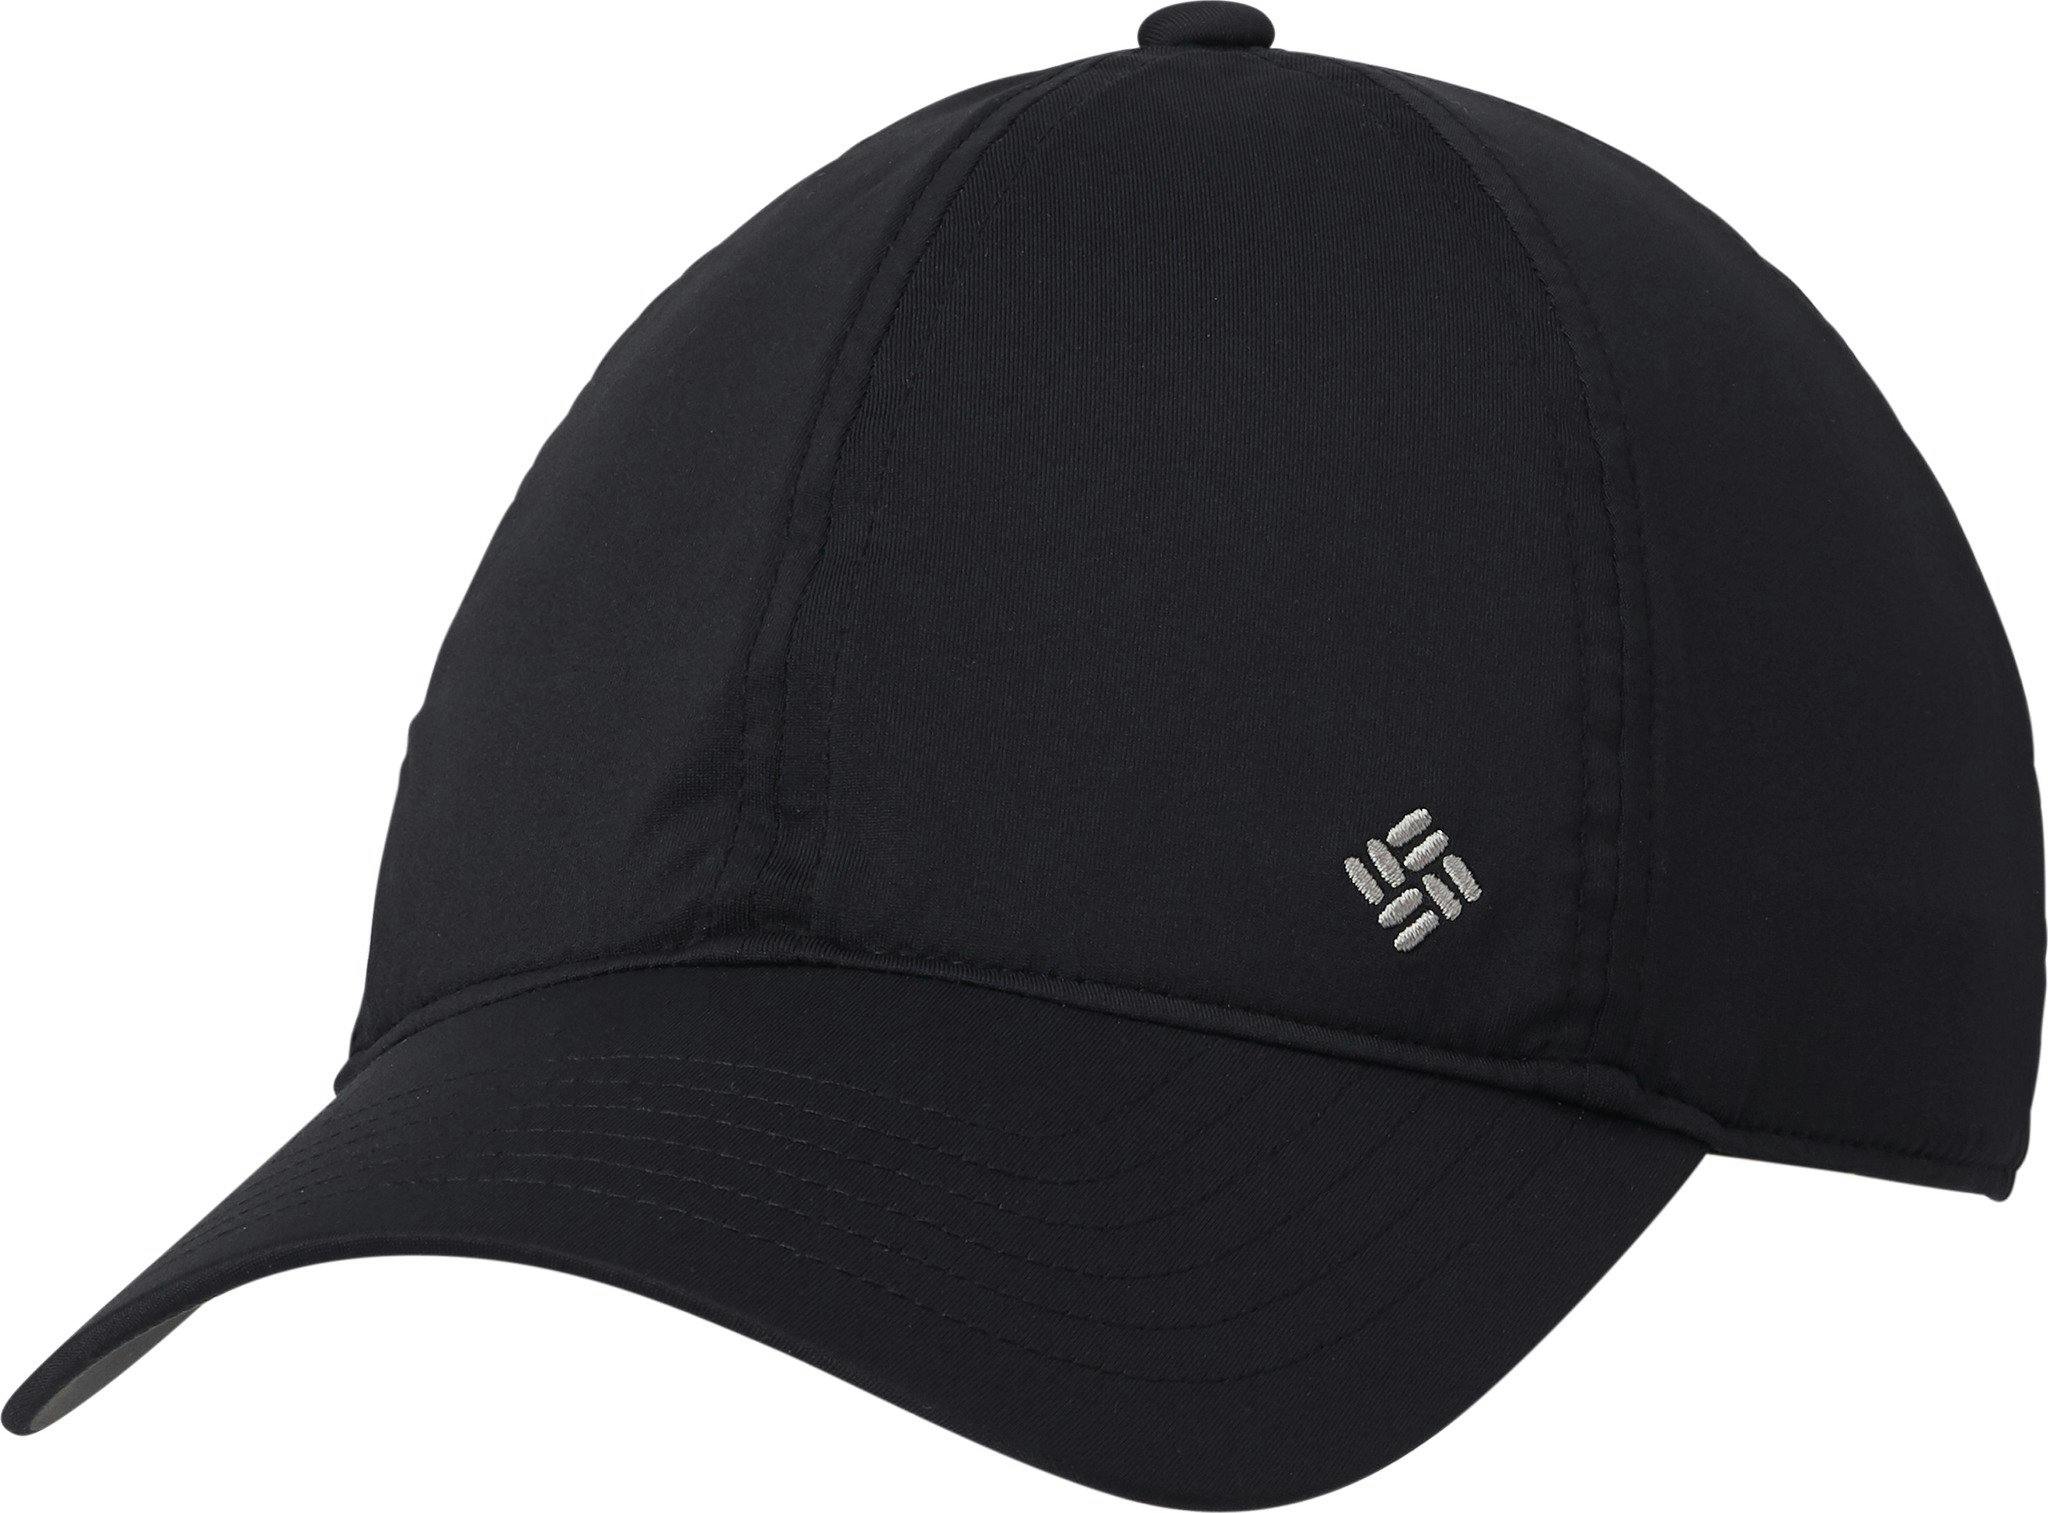 Product image for Coolhead II Ball Cap - Women's